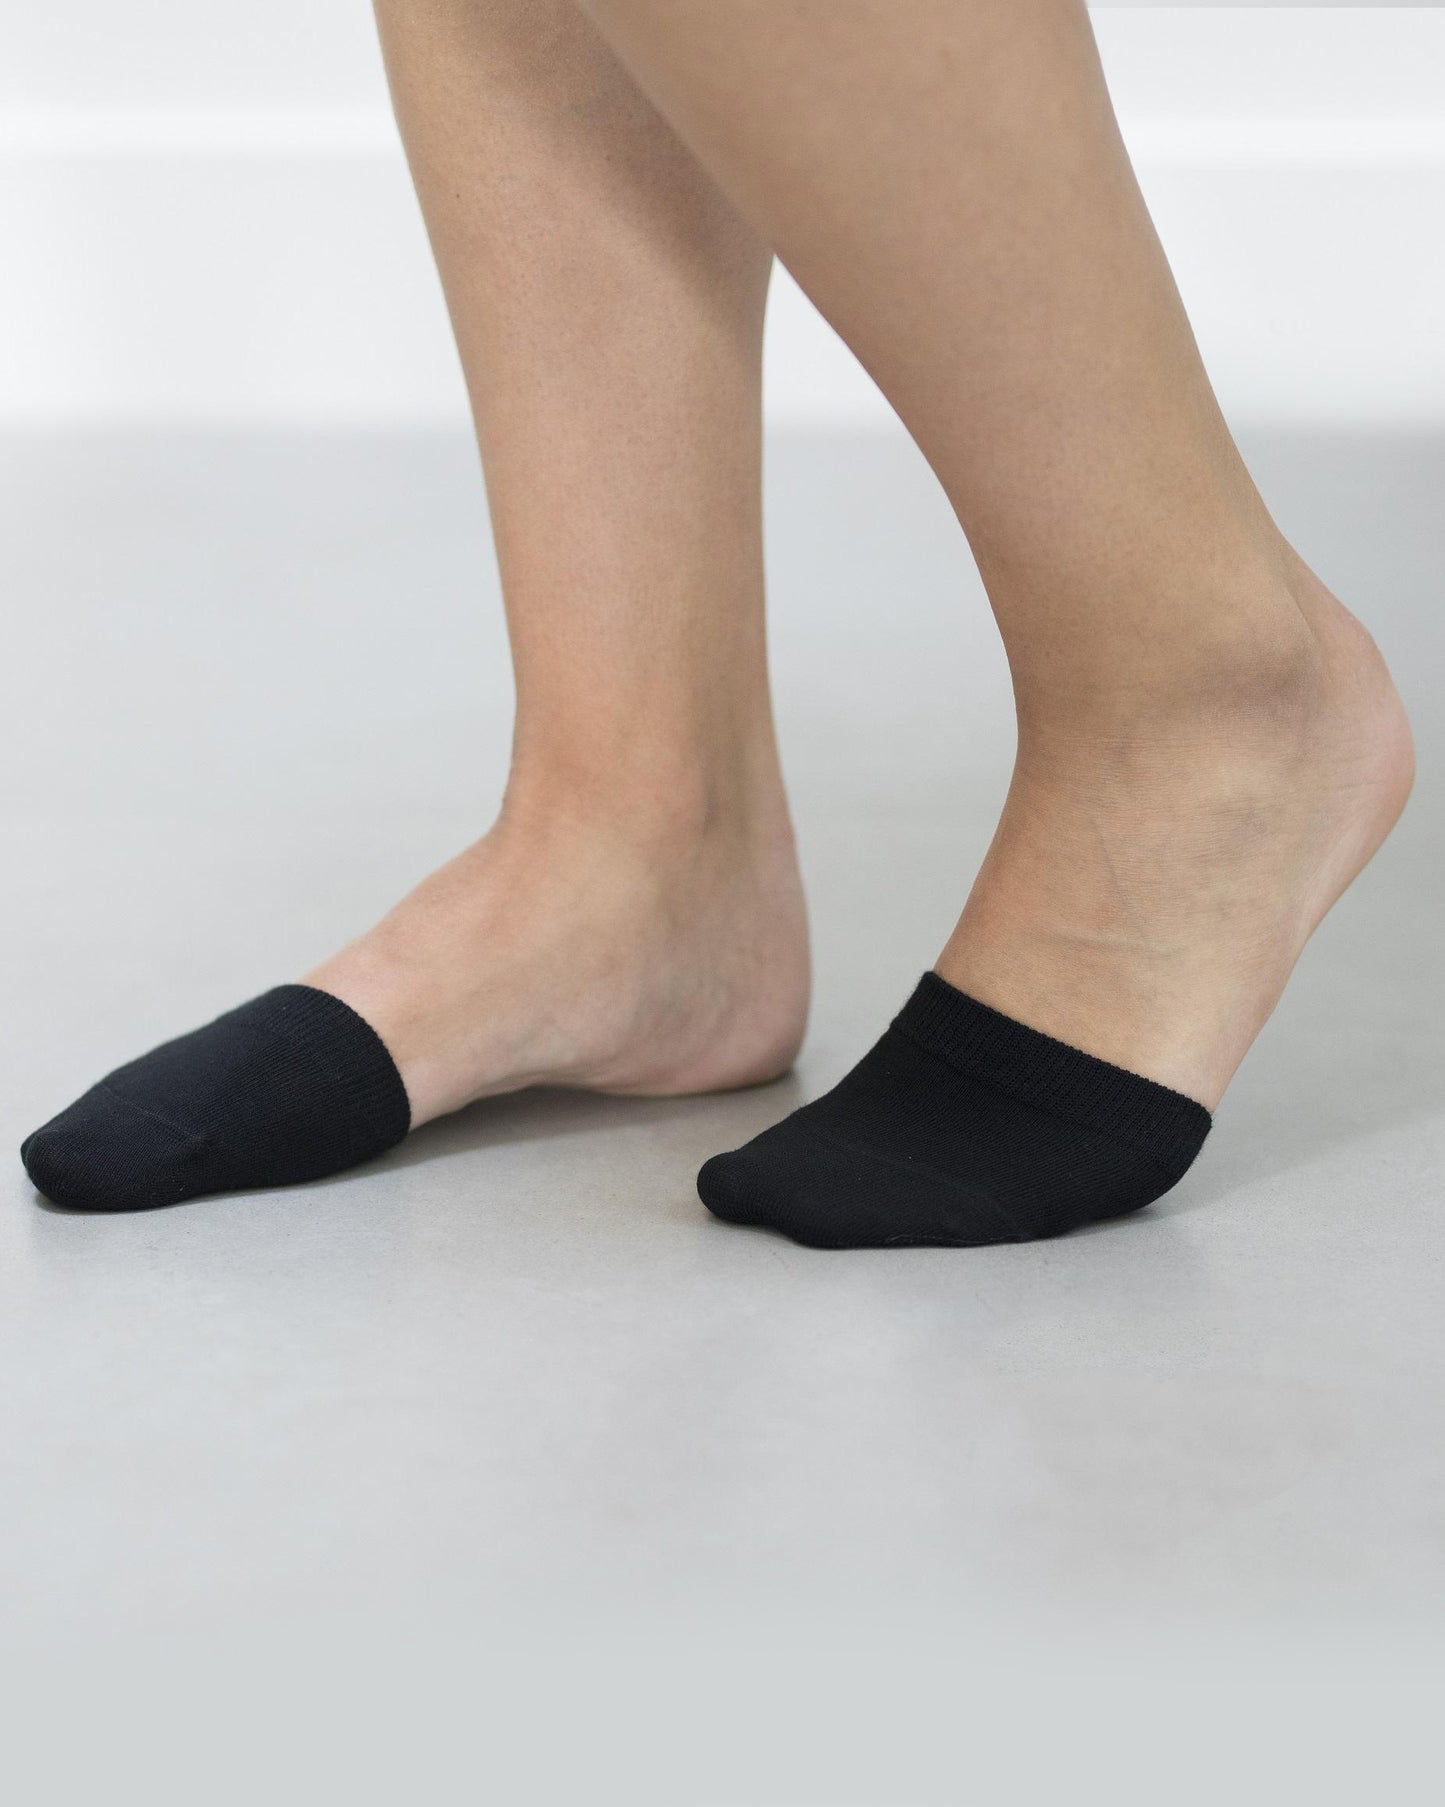 Bonnie Doon Toe Cover BE311000 - Black cotton toe sock perfect for wearing with mules or sling back shoes